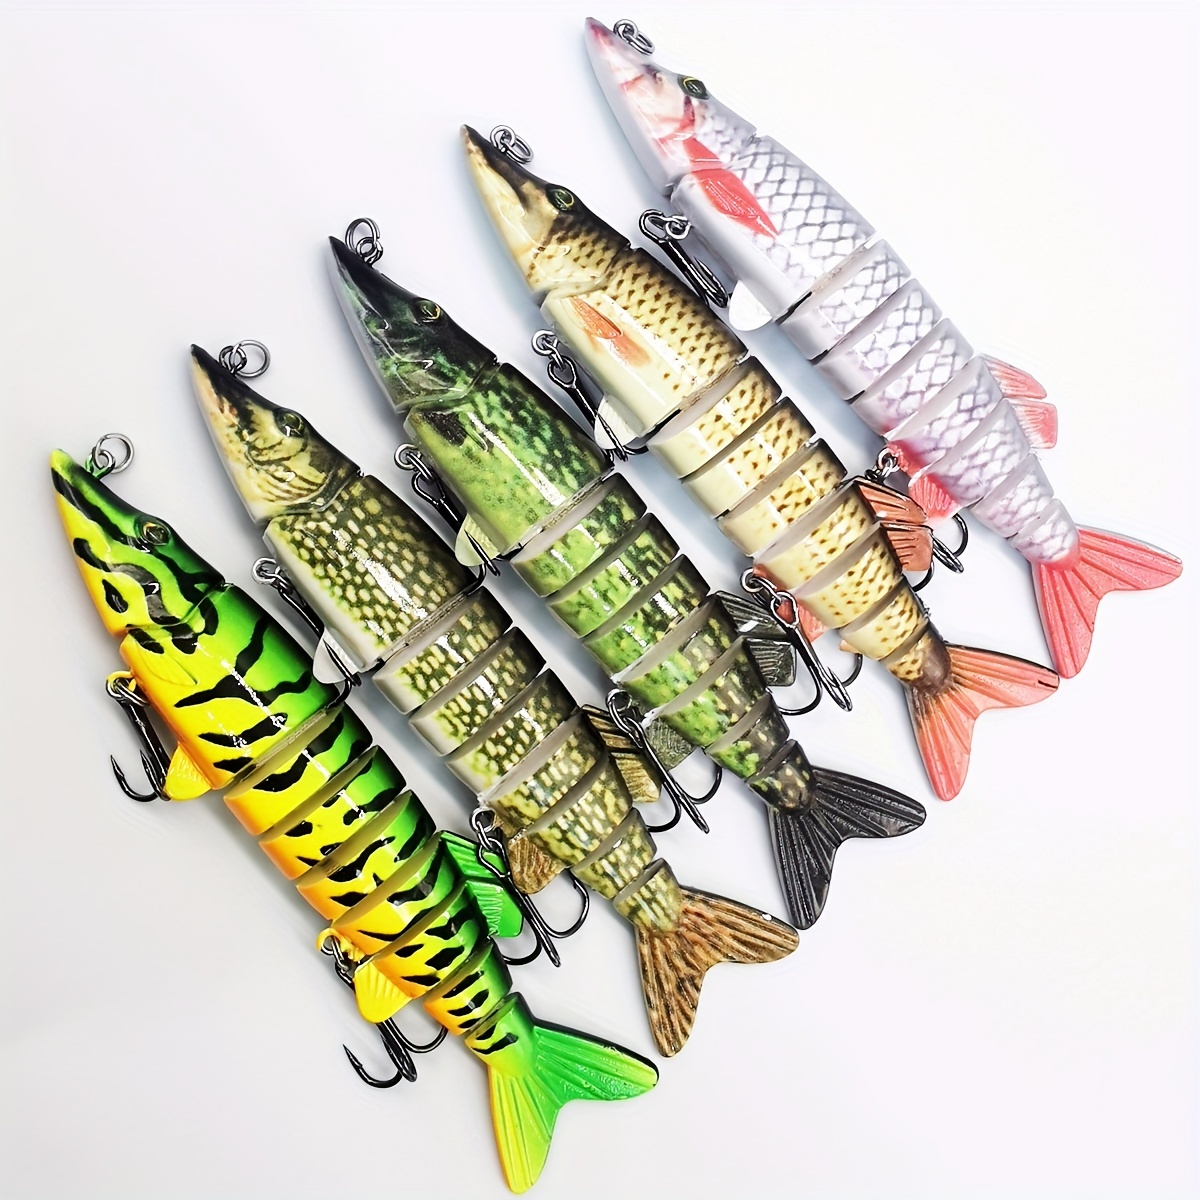  Fishing Lures For Bass Trout, Diving Lip Design Suspending  Jointed Crankbait, All-Purpose Trolling Glide Baits, Slow Sinking Jointed  Swimbaits Bionic Swimming Lures Bass Freshwater Saltwater